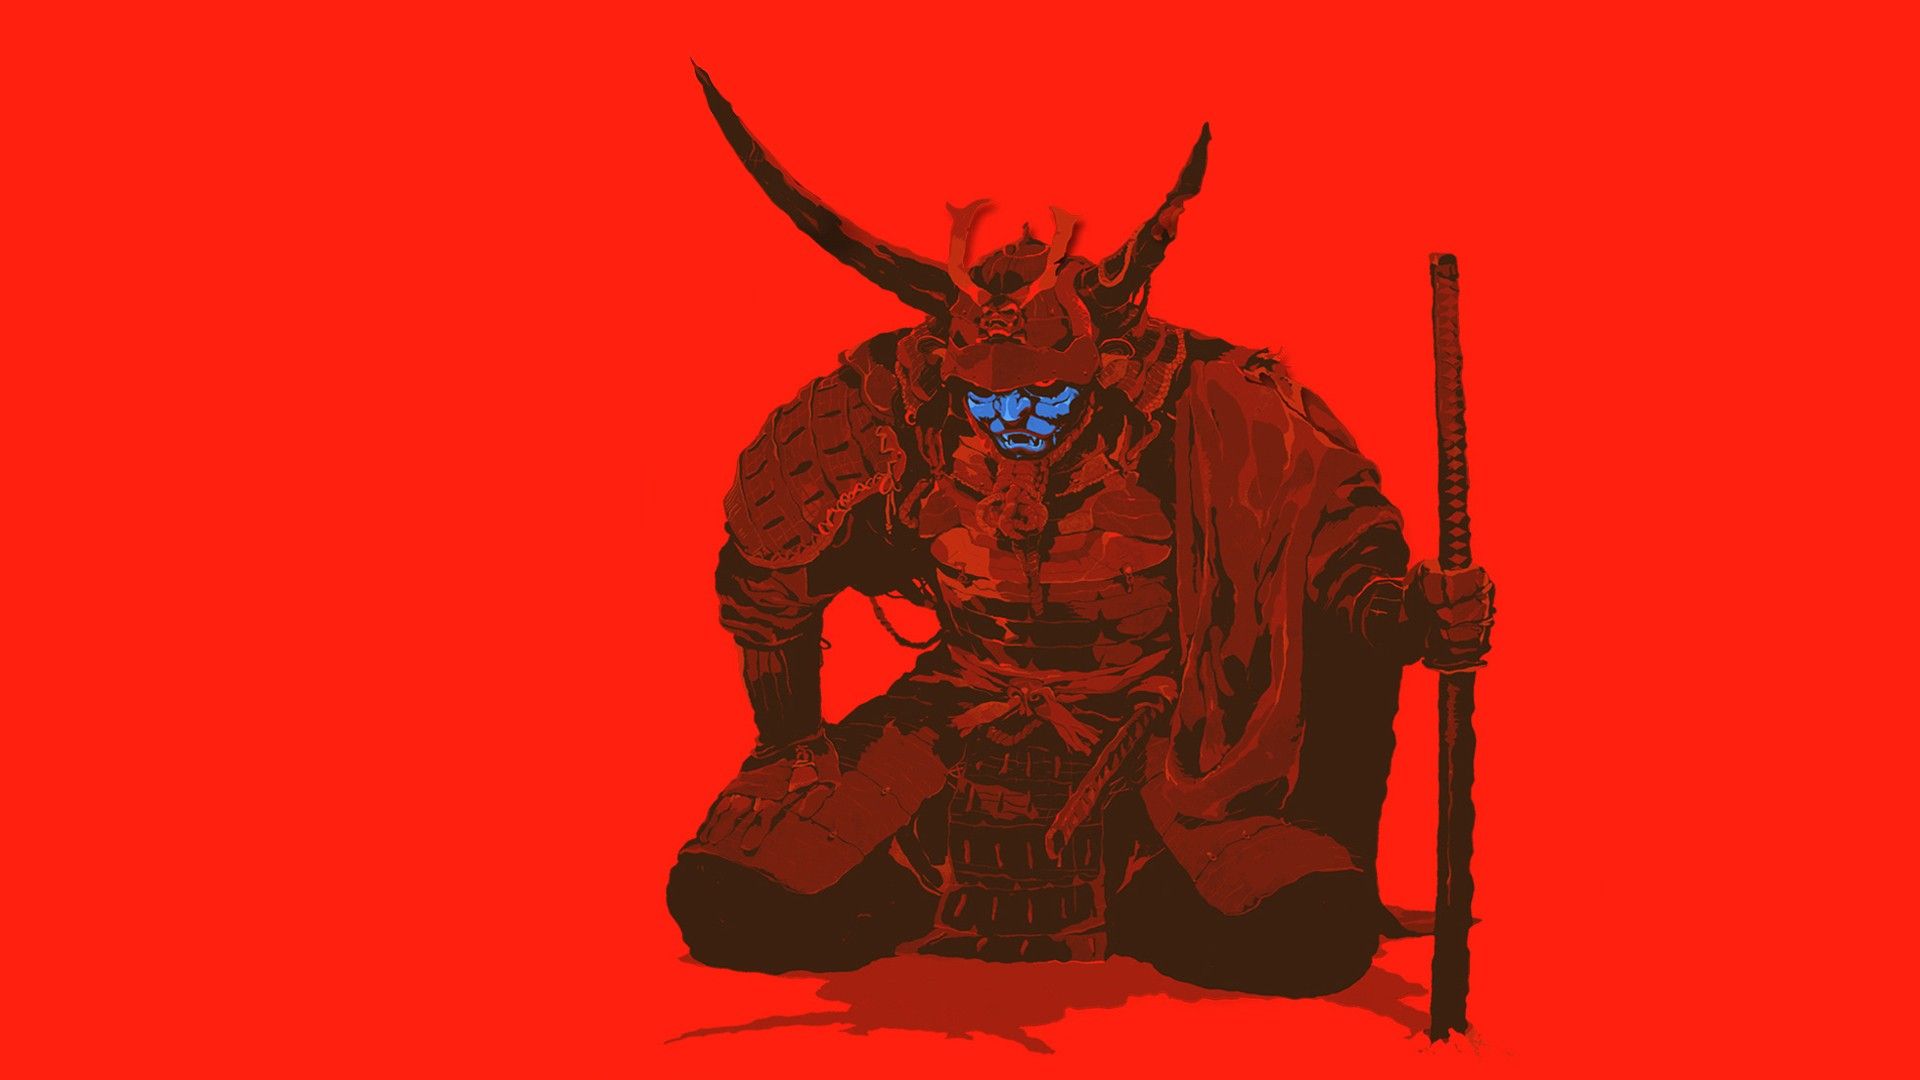 A samurai in red and black, holding a sword and kneeling on the ground. - Samurai